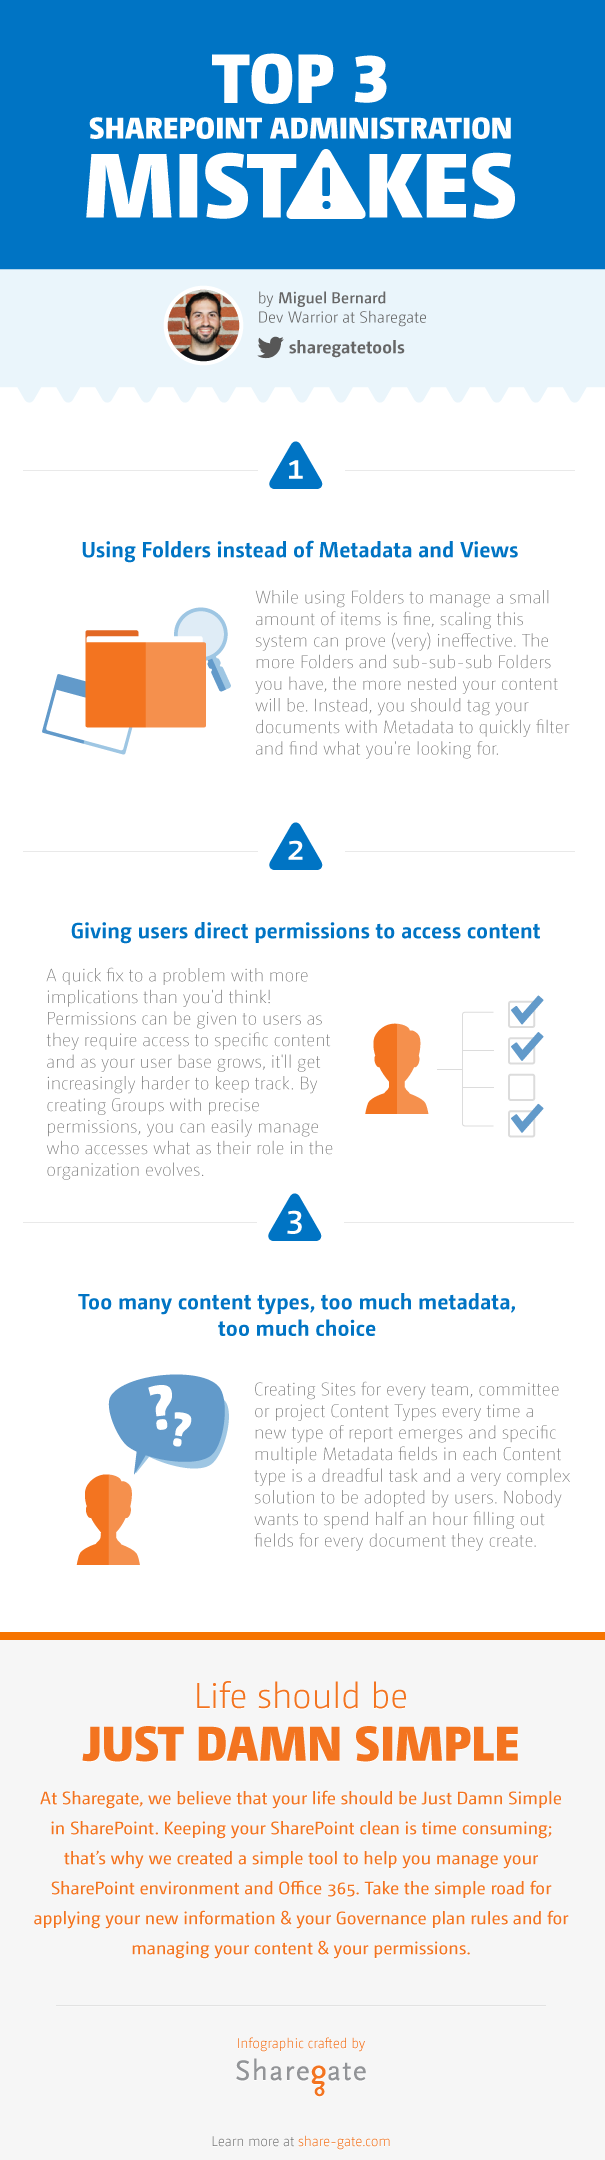 3 Ways to get Ready for SharePoint in 2015 [Infographic]